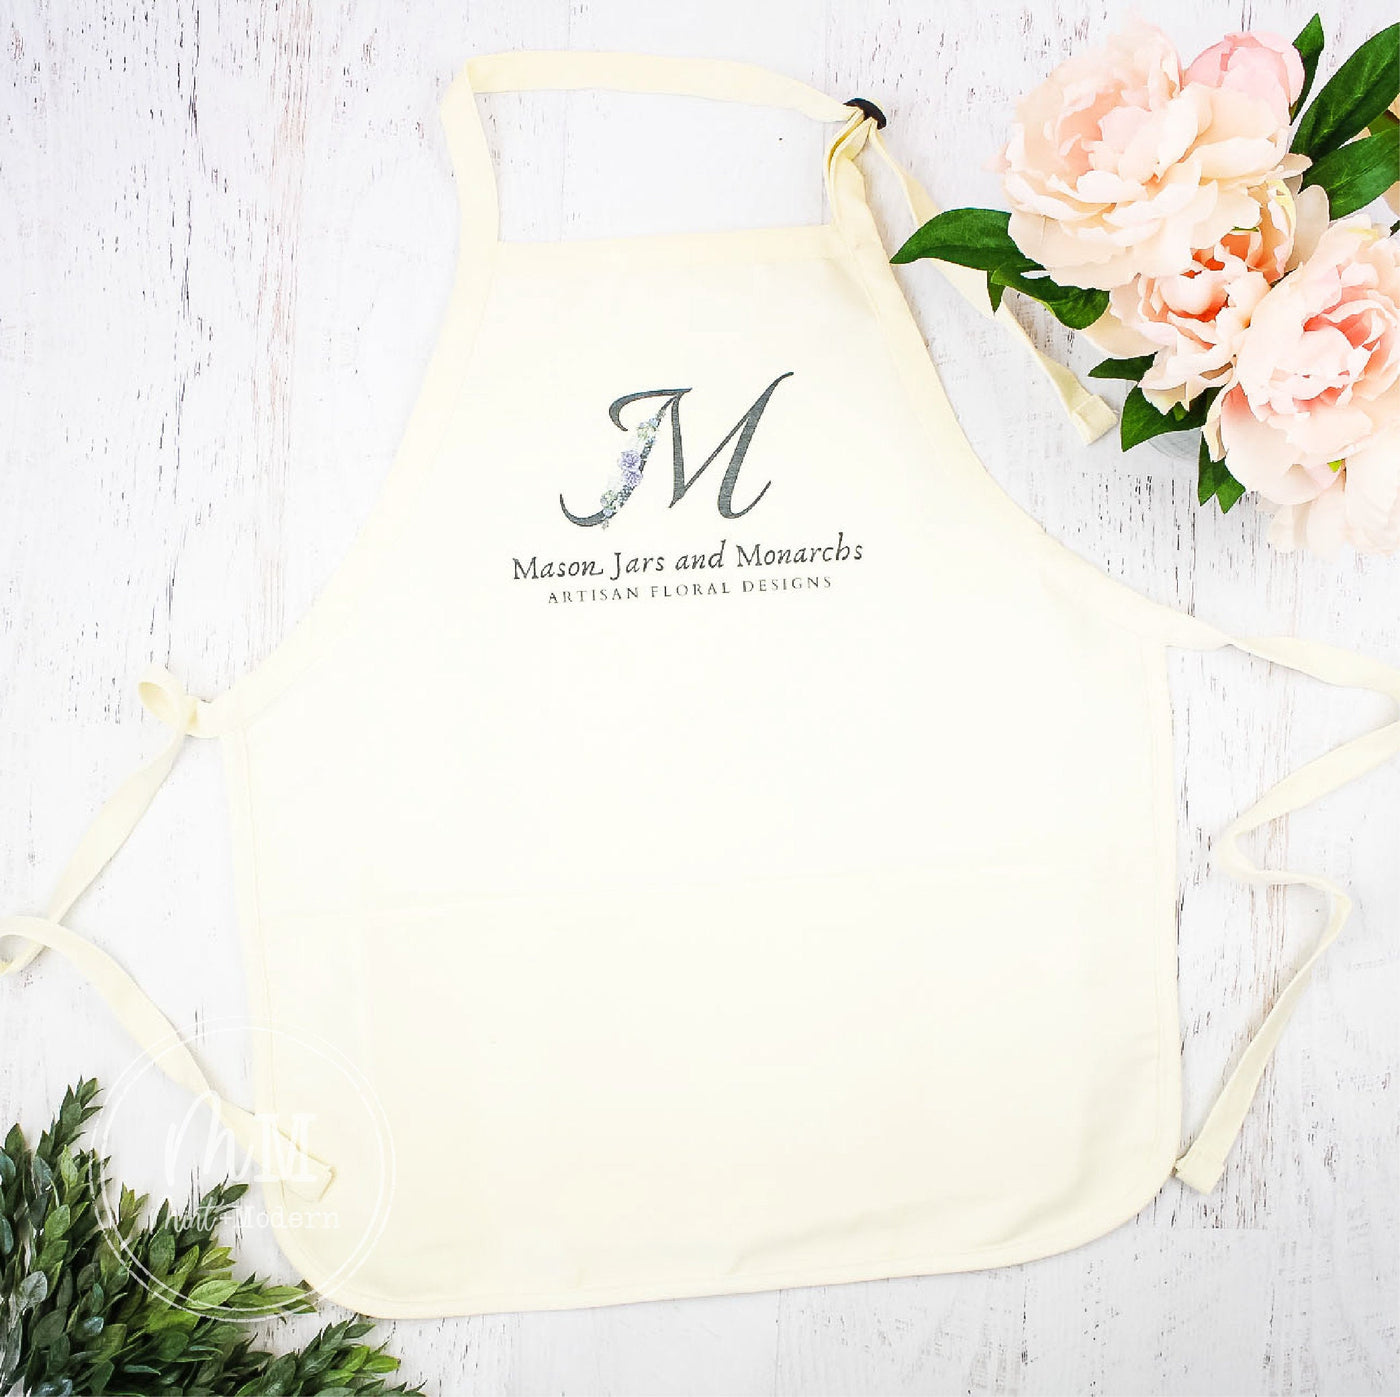 Full Color Branded Logo Apron with Pouch Pocket